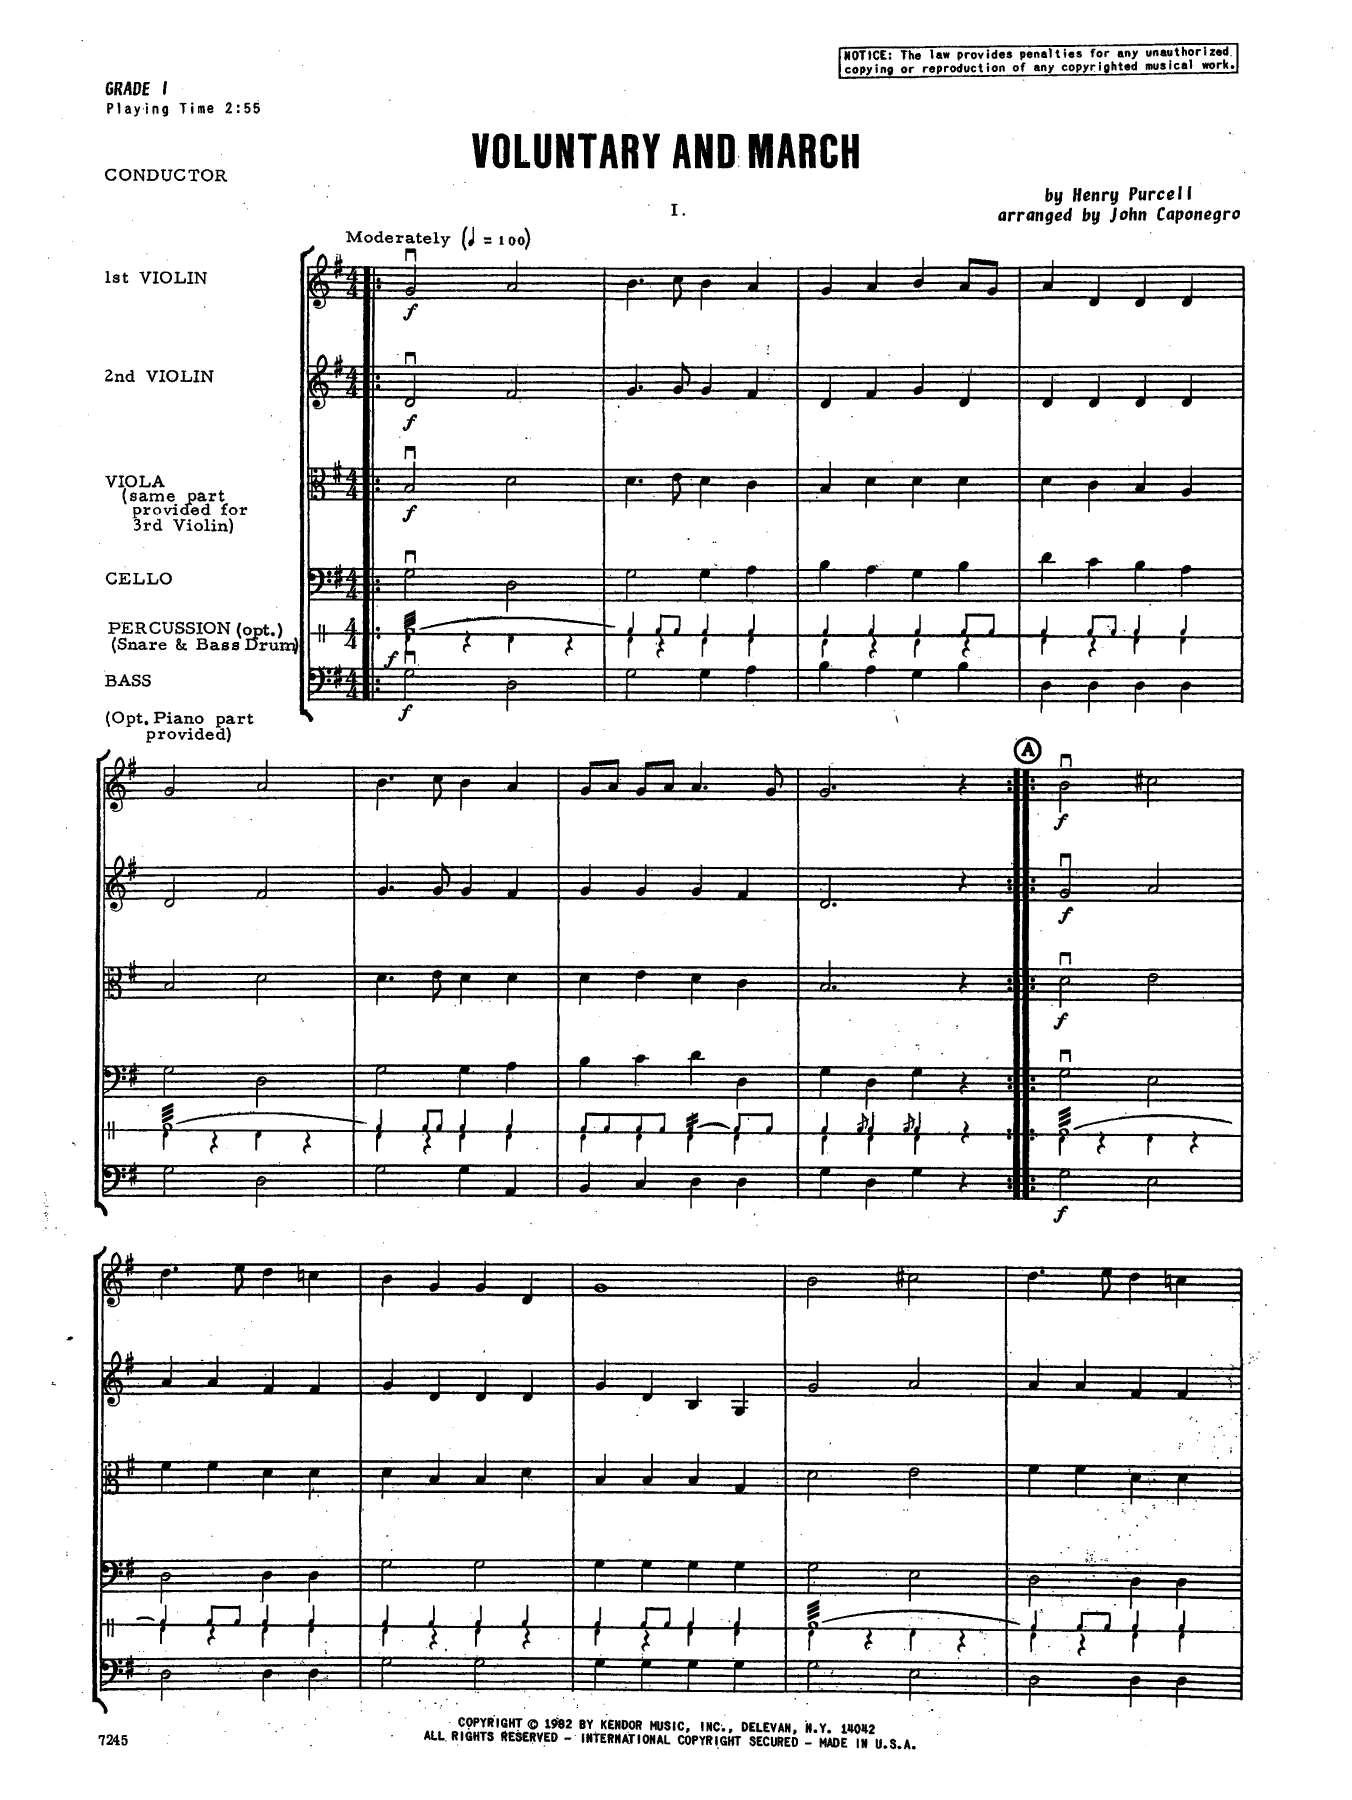 Download John Caponegro Voluntary and March - Full Score Sheet Music